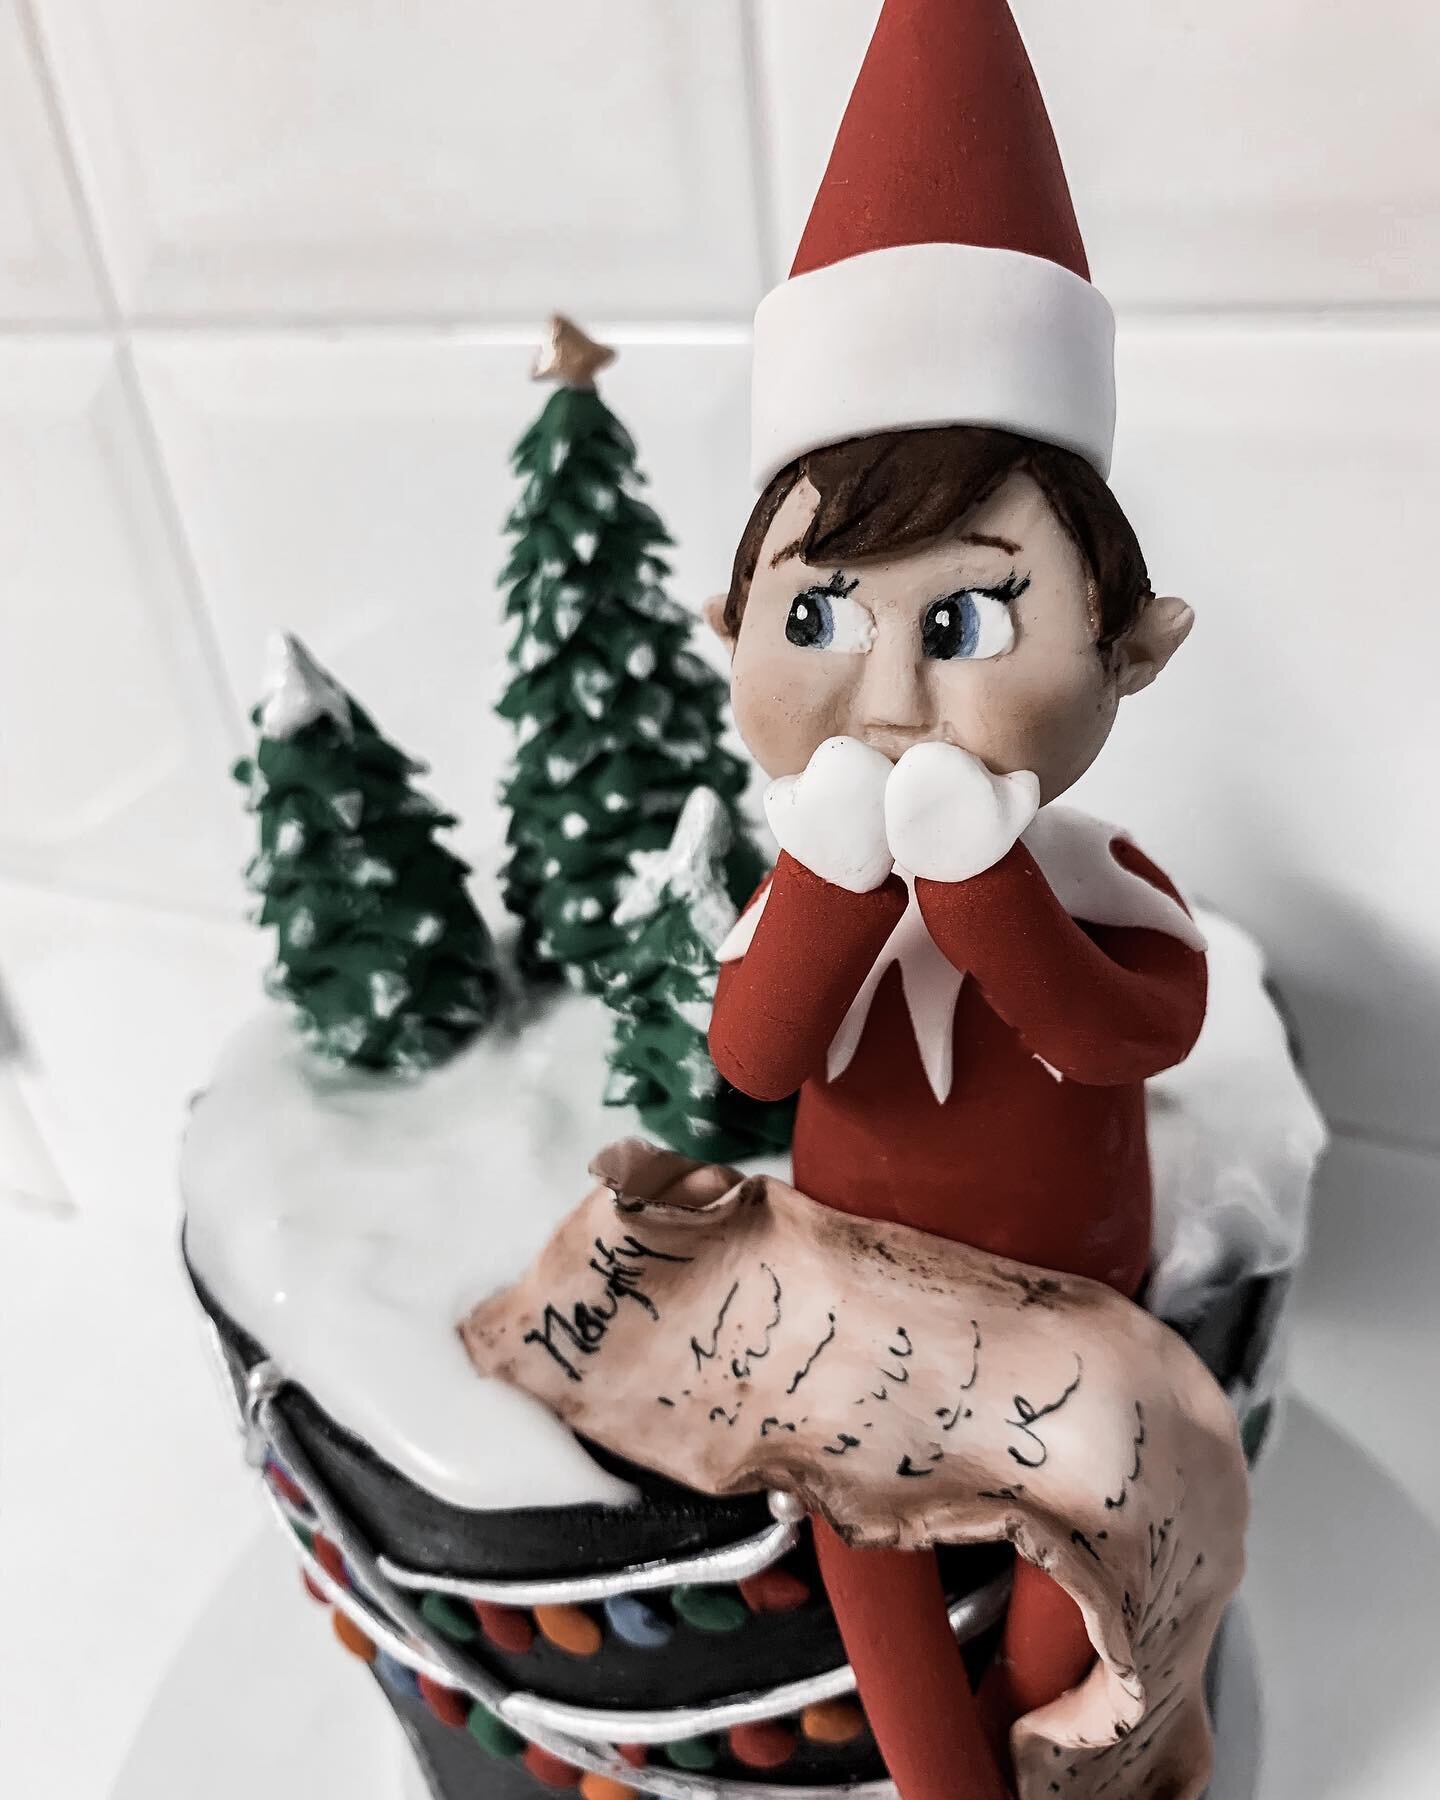 With two days to go, I’m checking off my to do list and schedule ! 

Does anyone else feel like Xmas just creeped up too fast this year?! 

🎀 🎄 

#naughtyornice #xmastime #elfontheshelf #areyouready #lists #schedulelife #cakelife #cakeart